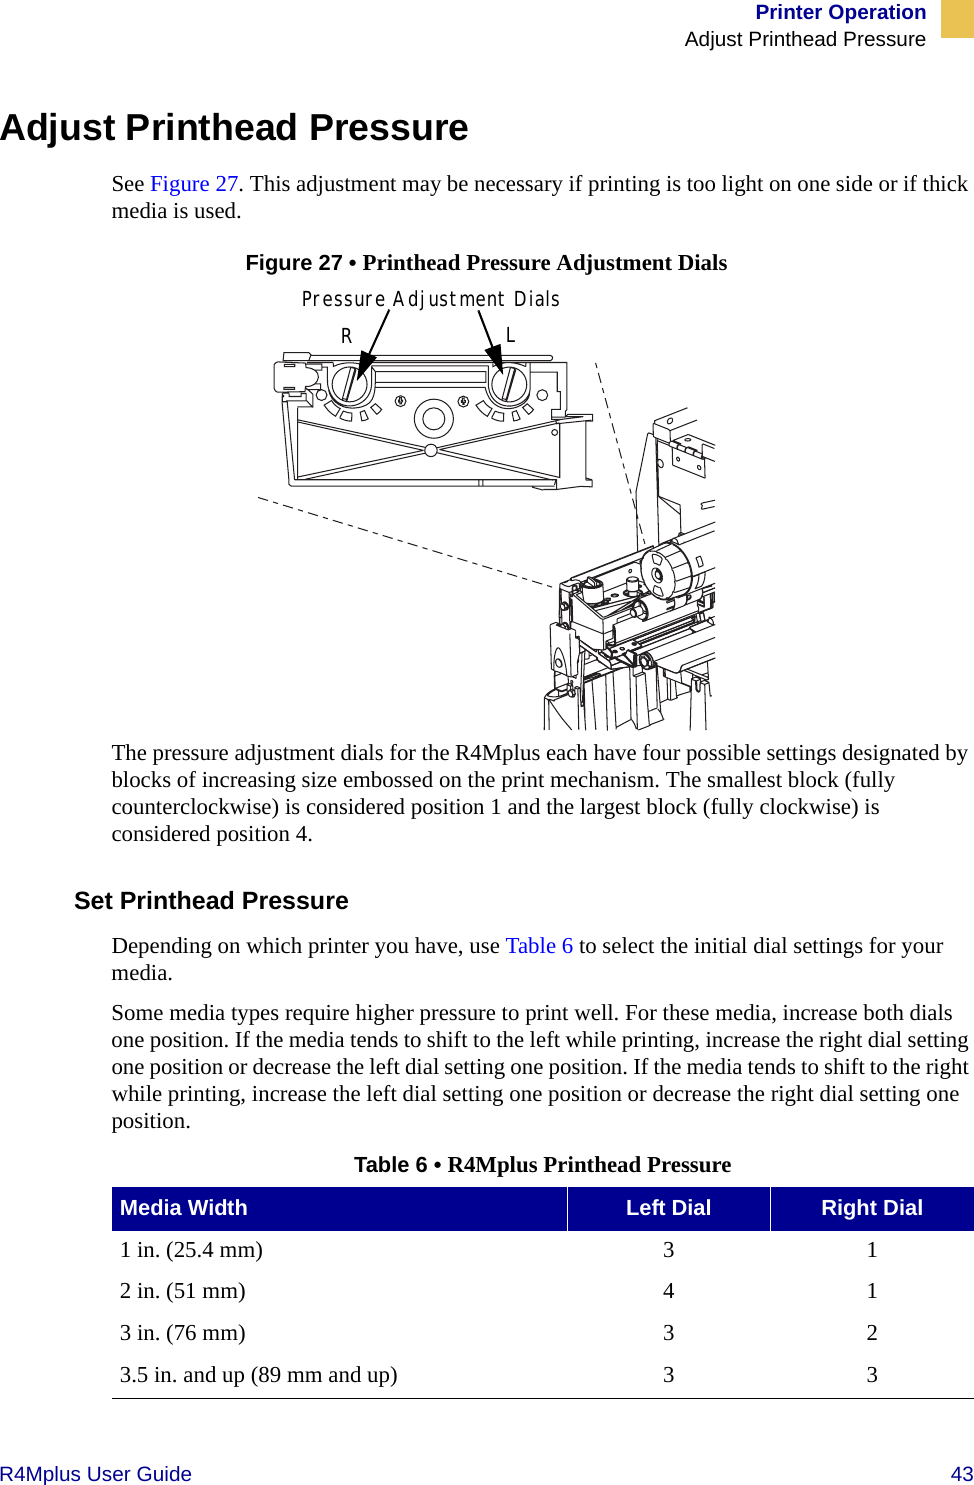 Printer OperationAdjust Printhead PressureR4Mplus User Guide  43Adjust Printhead PressureSee Figure 27. This adjustment may be necessary if printing is too light on one side or if thick media is used.Figure 27 • Printhead Pressure Adjustment DialsThe pressure adjustment dials for the R4Mplus each have four possible settings designated by blocks of increasing size embossed on the print mechanism. The smallest block (fully counterclockwise) is considered position 1 and the largest block (fully clockwise) is considered position 4.Set Printhead PressureDepending on which printer you have, use Table 6 to select the initial dial settings for your media.Some media types require higher pressure to print well. For these media, increase both dials one position. If the media tends to shift to the left while printing, increase the right dial setting one position or decrease the left dial setting one position. If the media tends to shift to the right while printing, increase the left dial setting one position or decrease the right dial setting one position.Table 6 • R4Mplus Printhead PressureMedia Width Left Dial Right Dial1 in. (25.4 mm) 3 12 in. (51 mm) 4 13 in. (76 mm) 3 23.5 in. and up (89 mm and up) 3 3Pressure Adjustment DialsRL